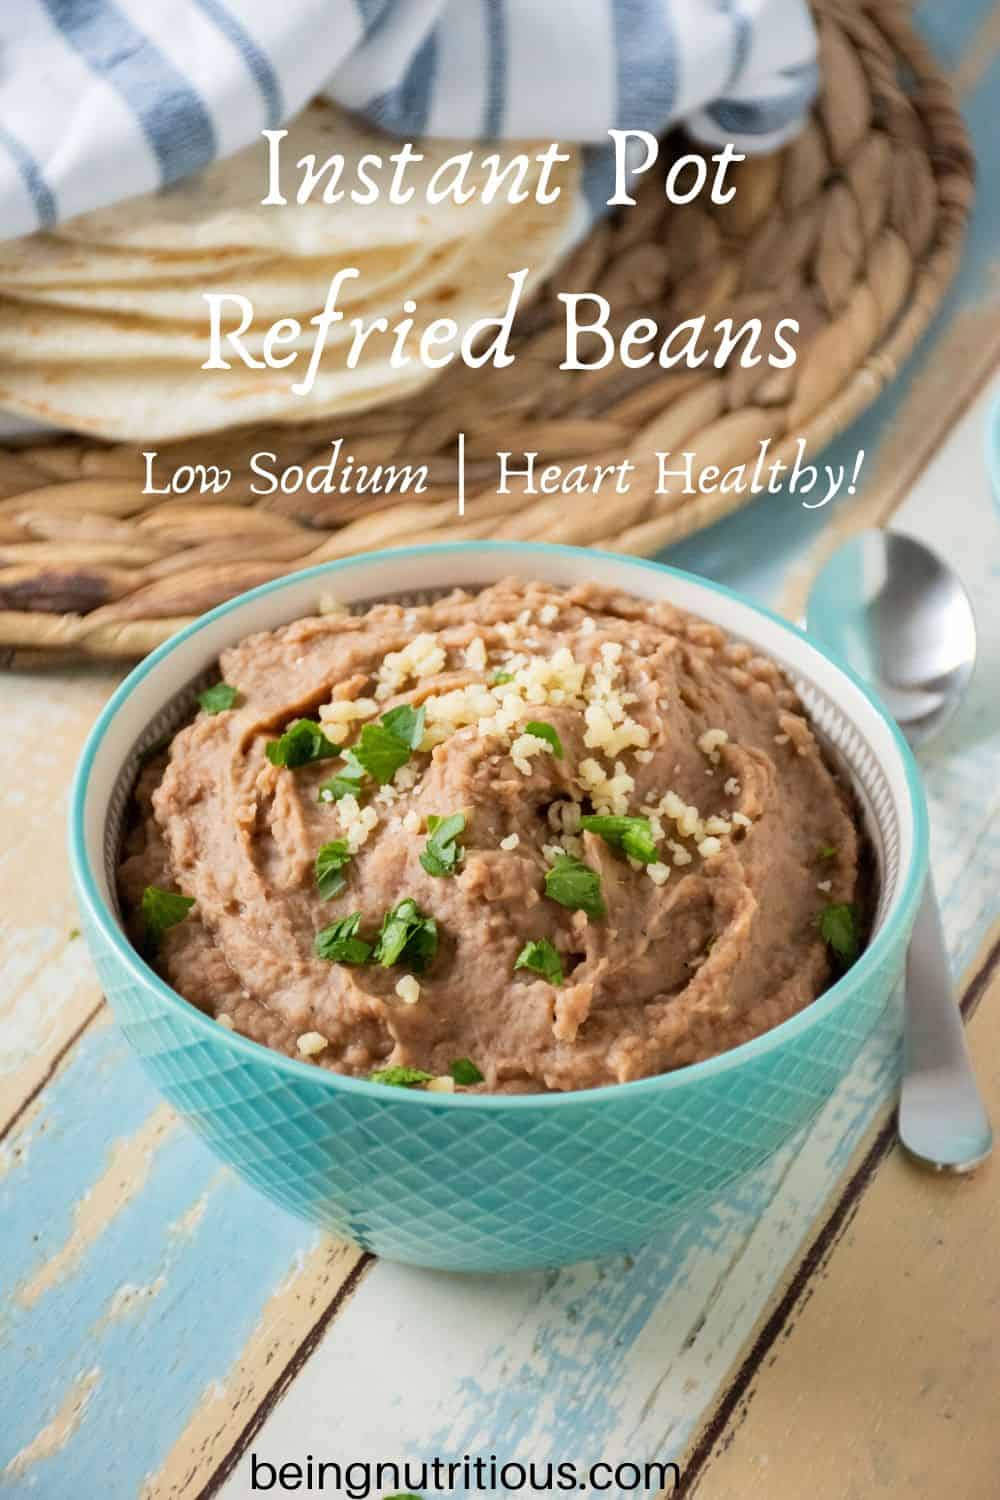 Bowl of refried beans with tortillas in the background.